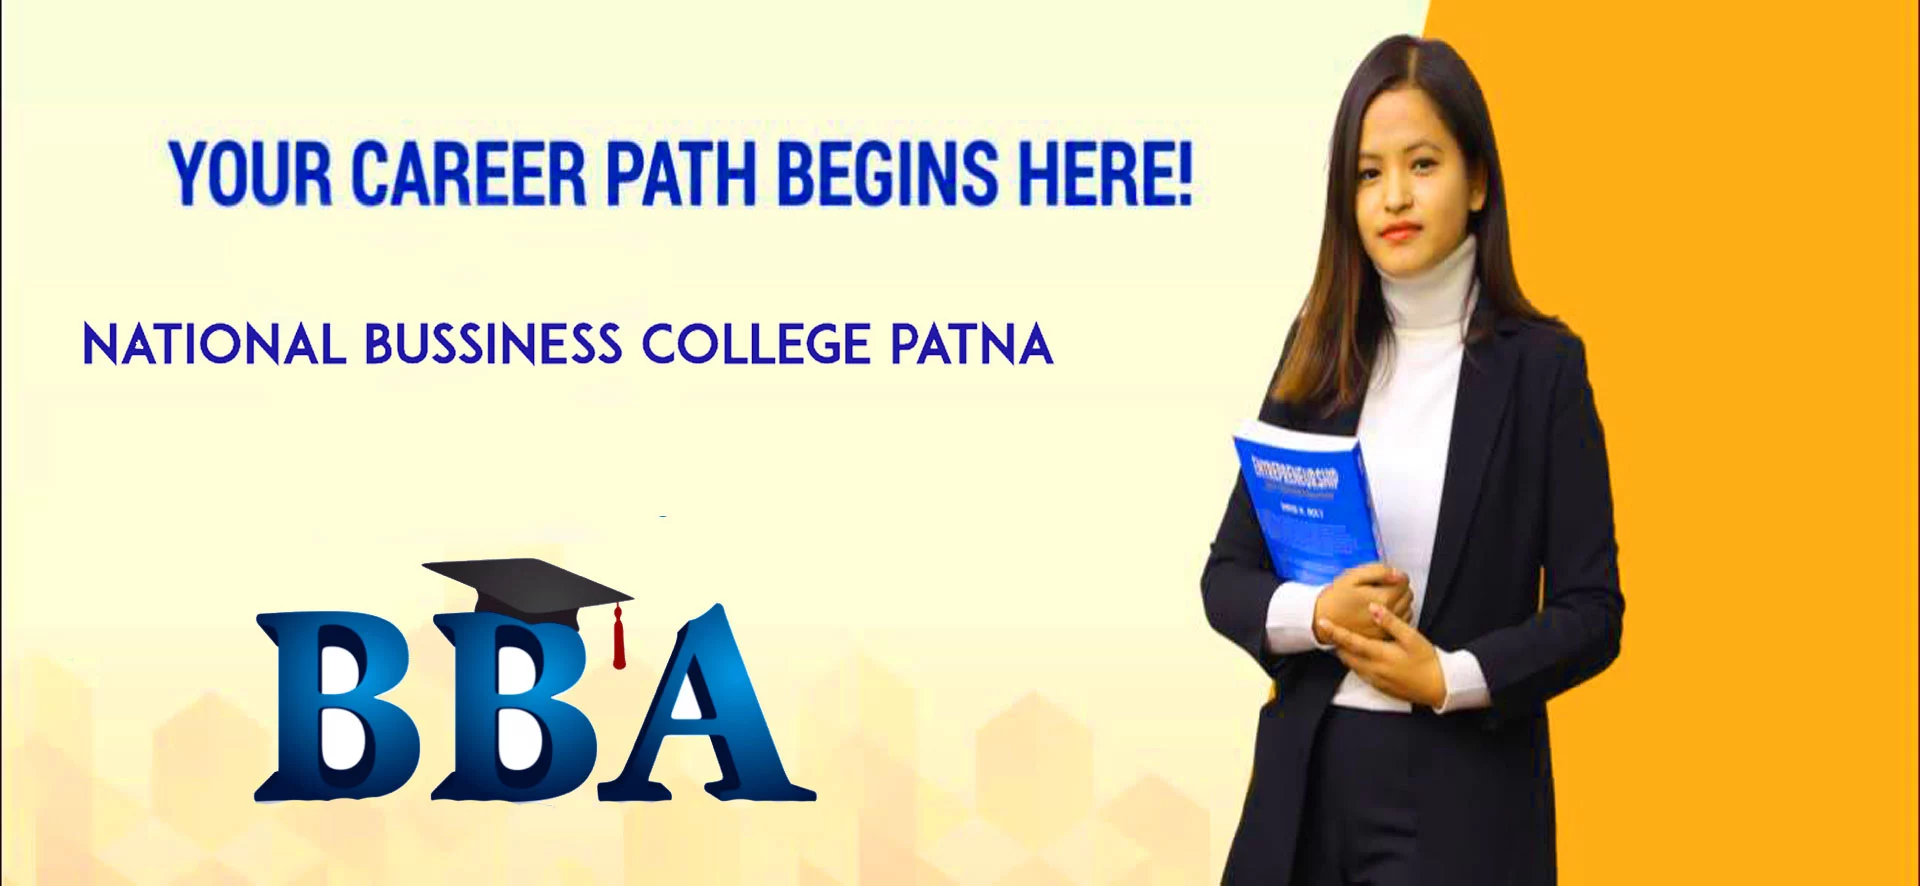 your career path begins here!